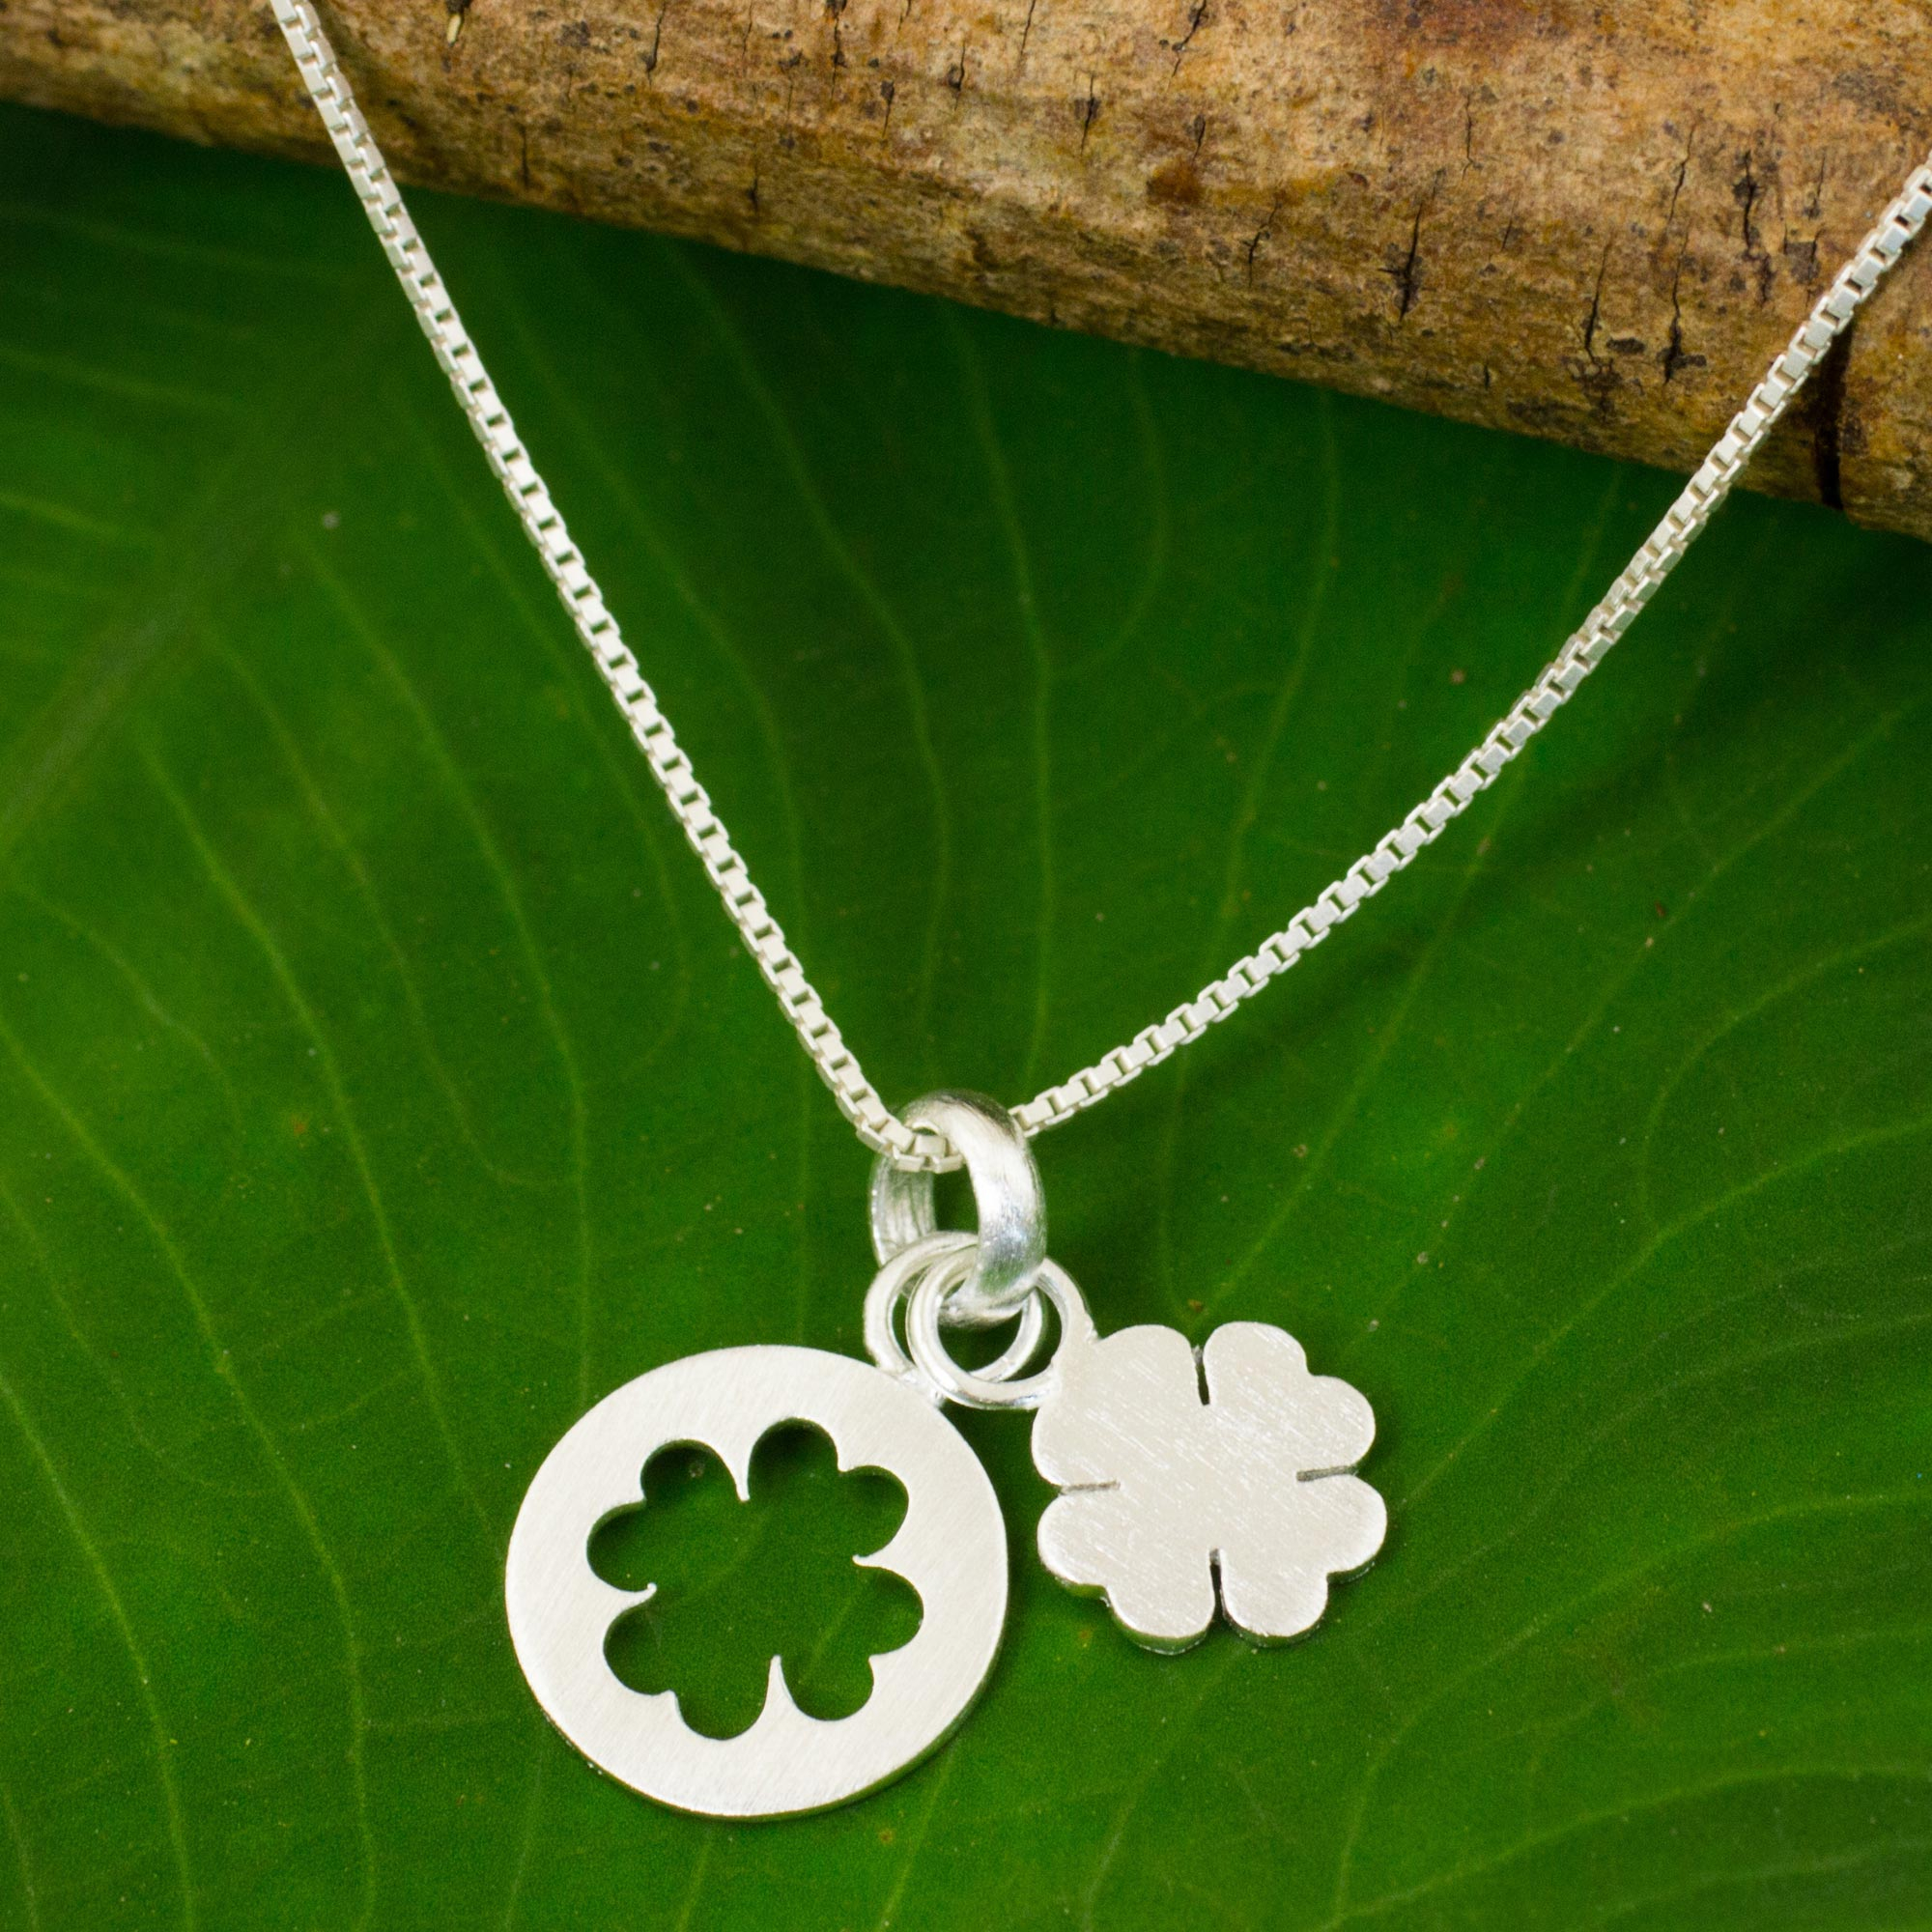 Thai Brushed Sterling Silver Lucky Clover Pendant Necklace - Four Leaf  Clover